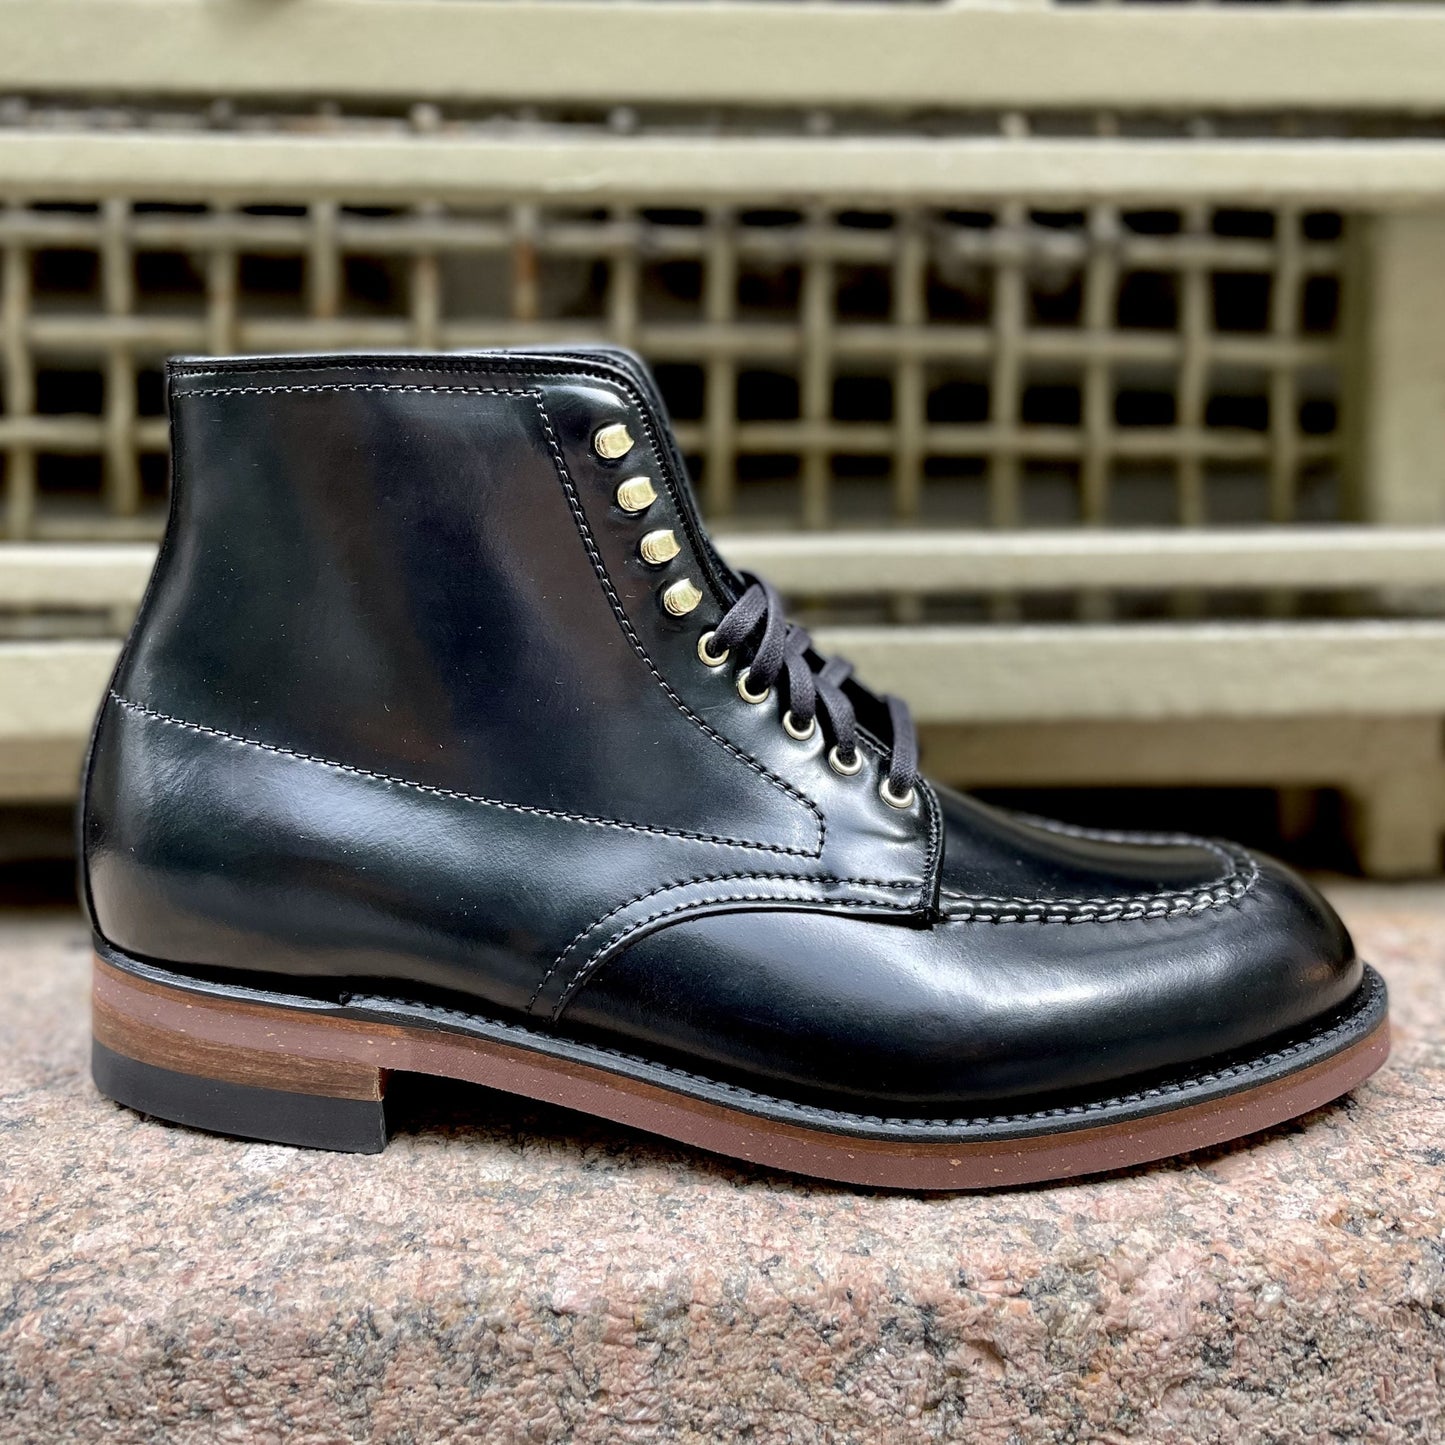 D1908H - Copake Indy Boot in Black Shell